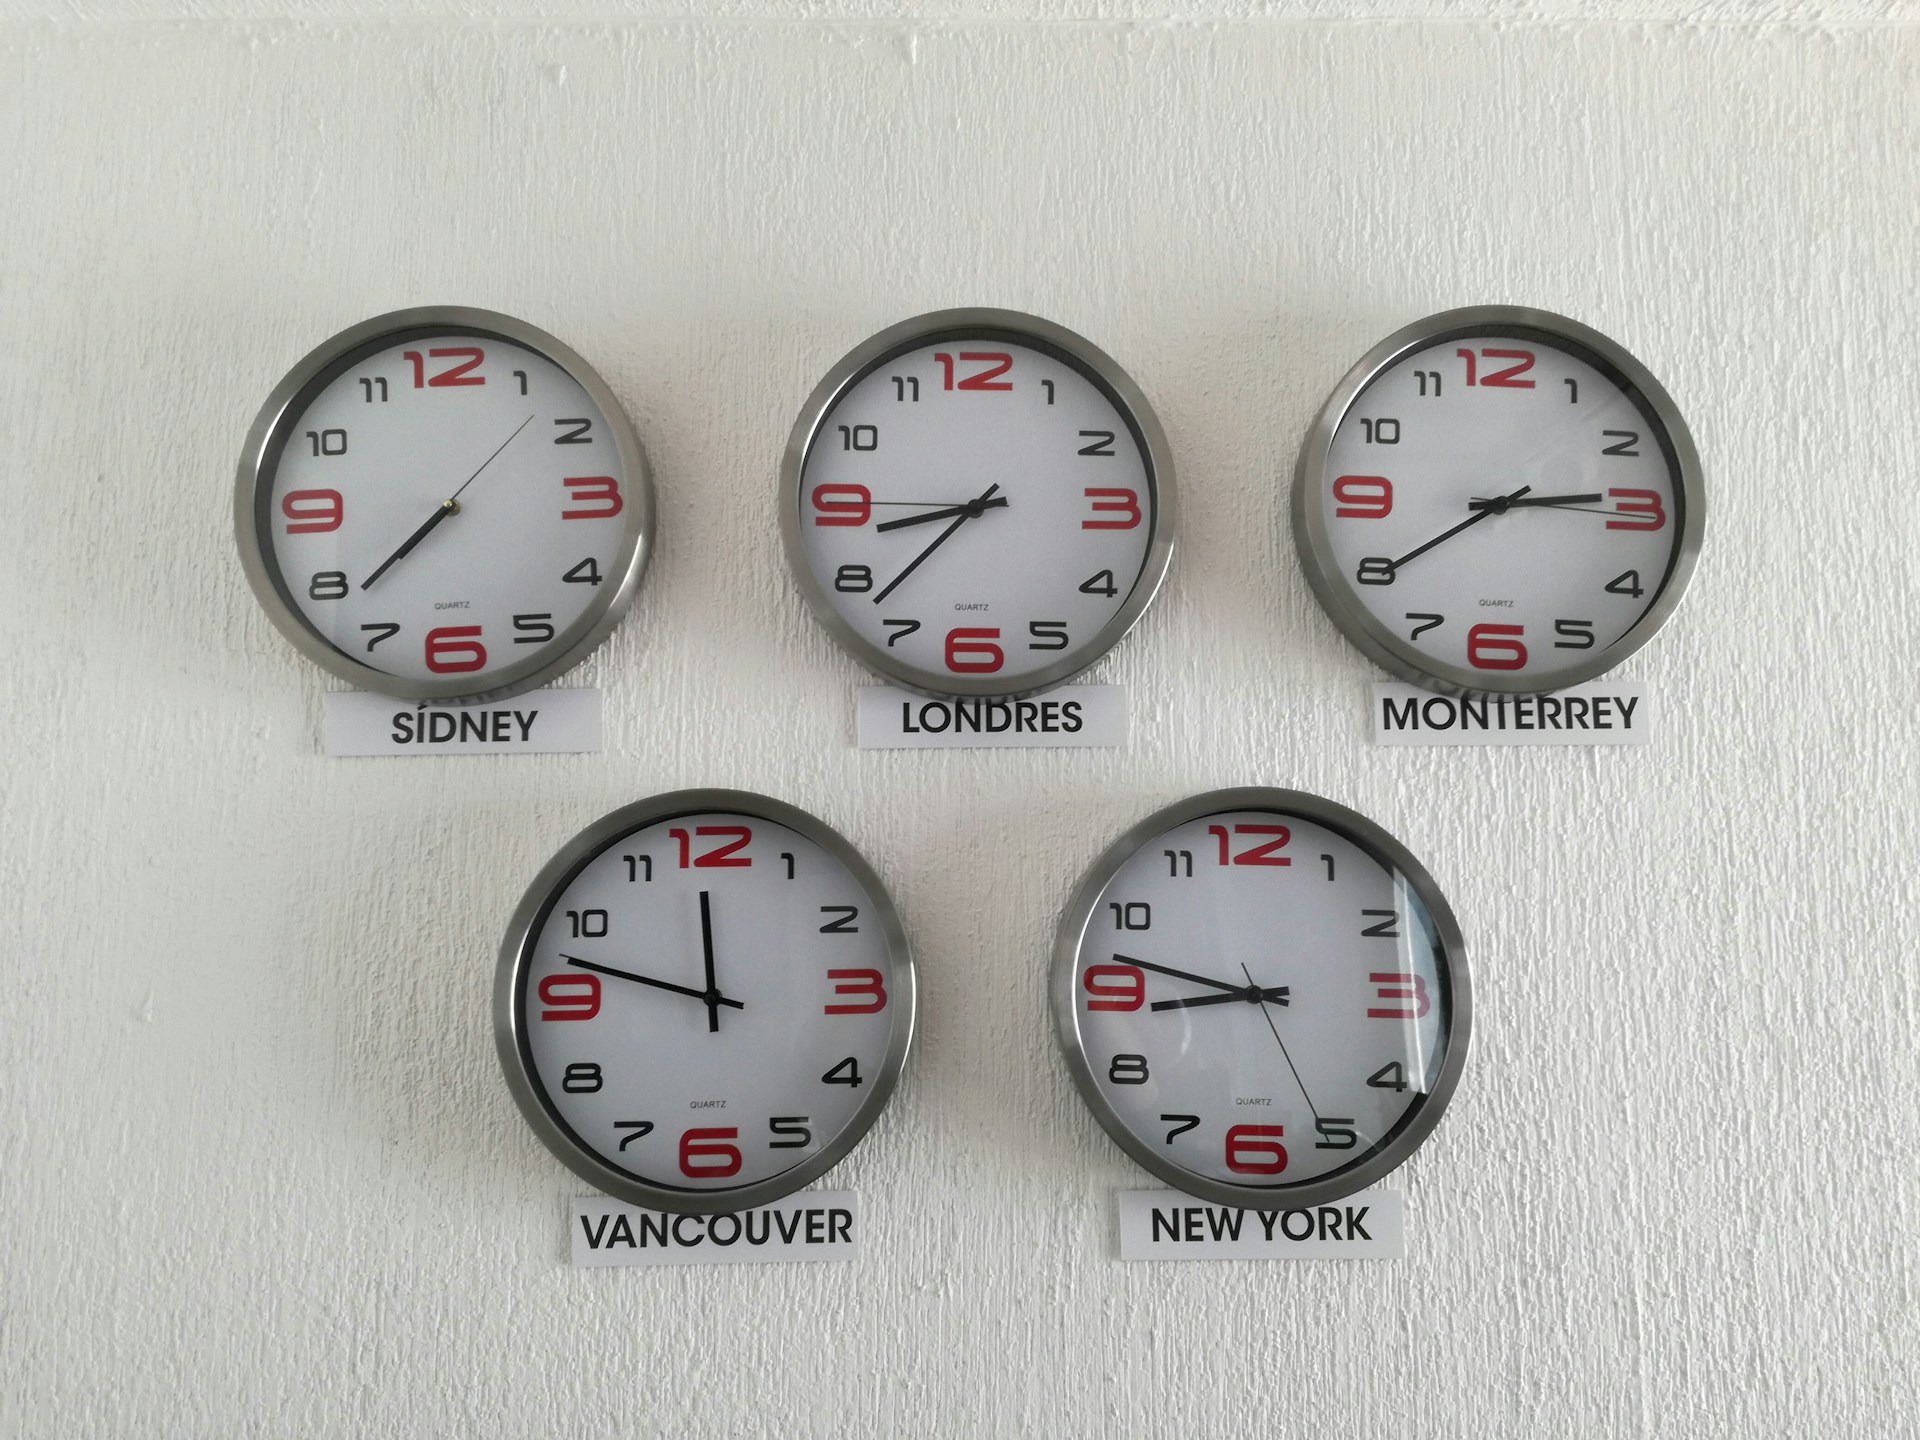 six clocks showing different time zones